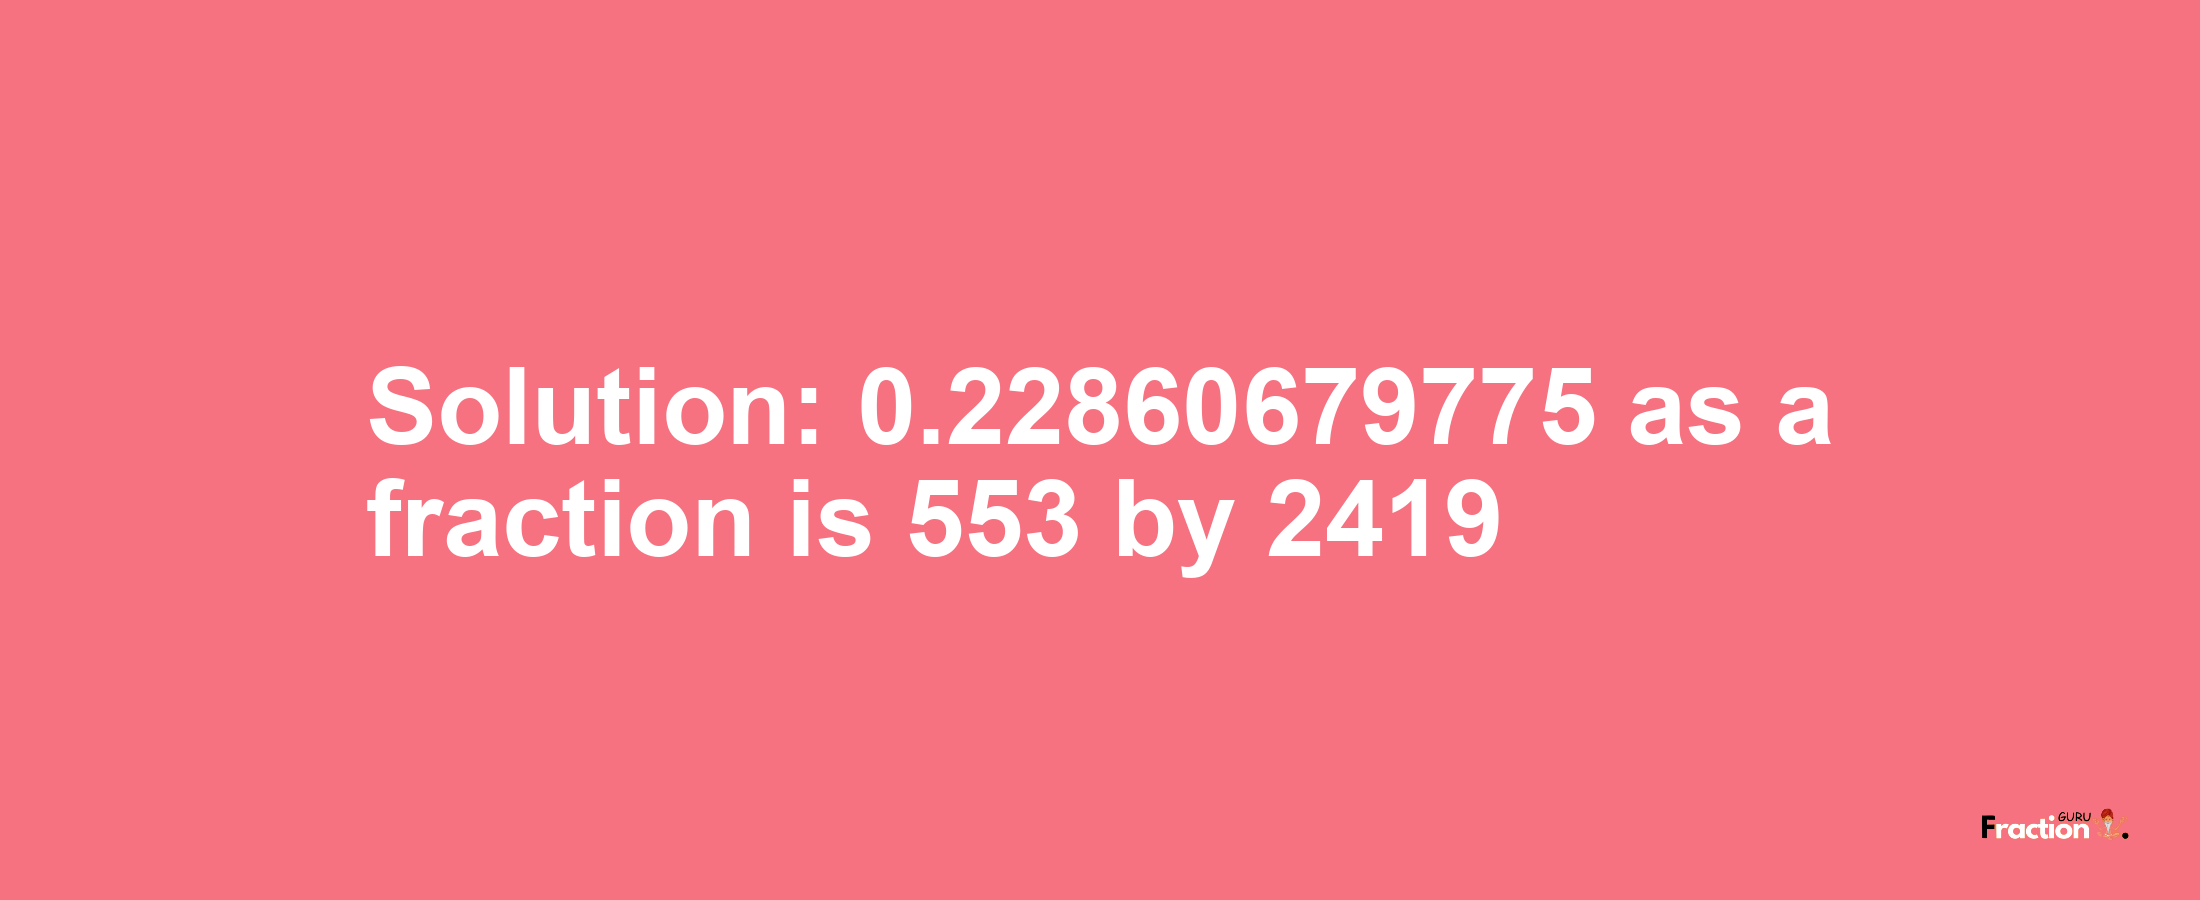 Solution:0.22860679775 as a fraction is 553/2419